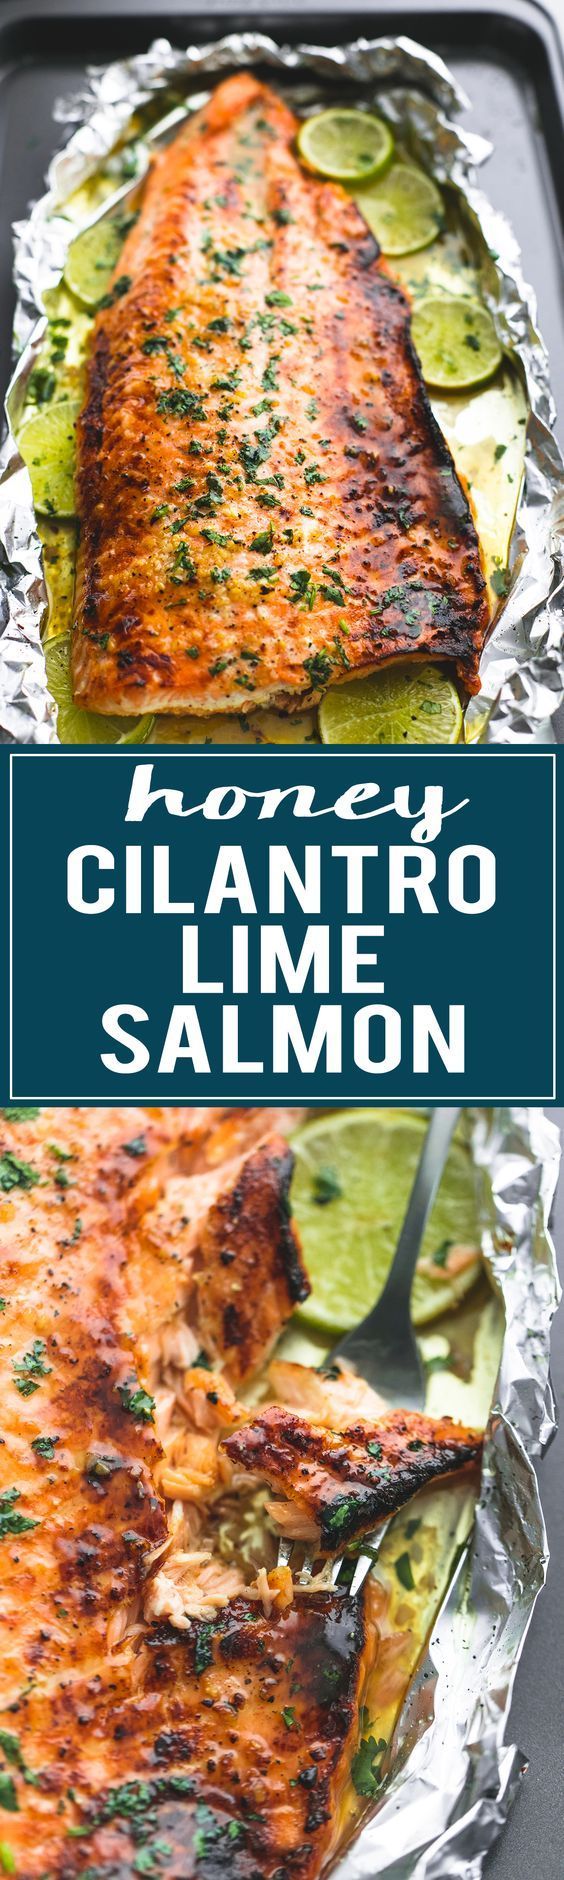 Healthy, Baked Honey Cilantro Lime Salmon is ready in 30 minutes with a 4-ingredient glaze to die for! | lecremedelacrumb.com